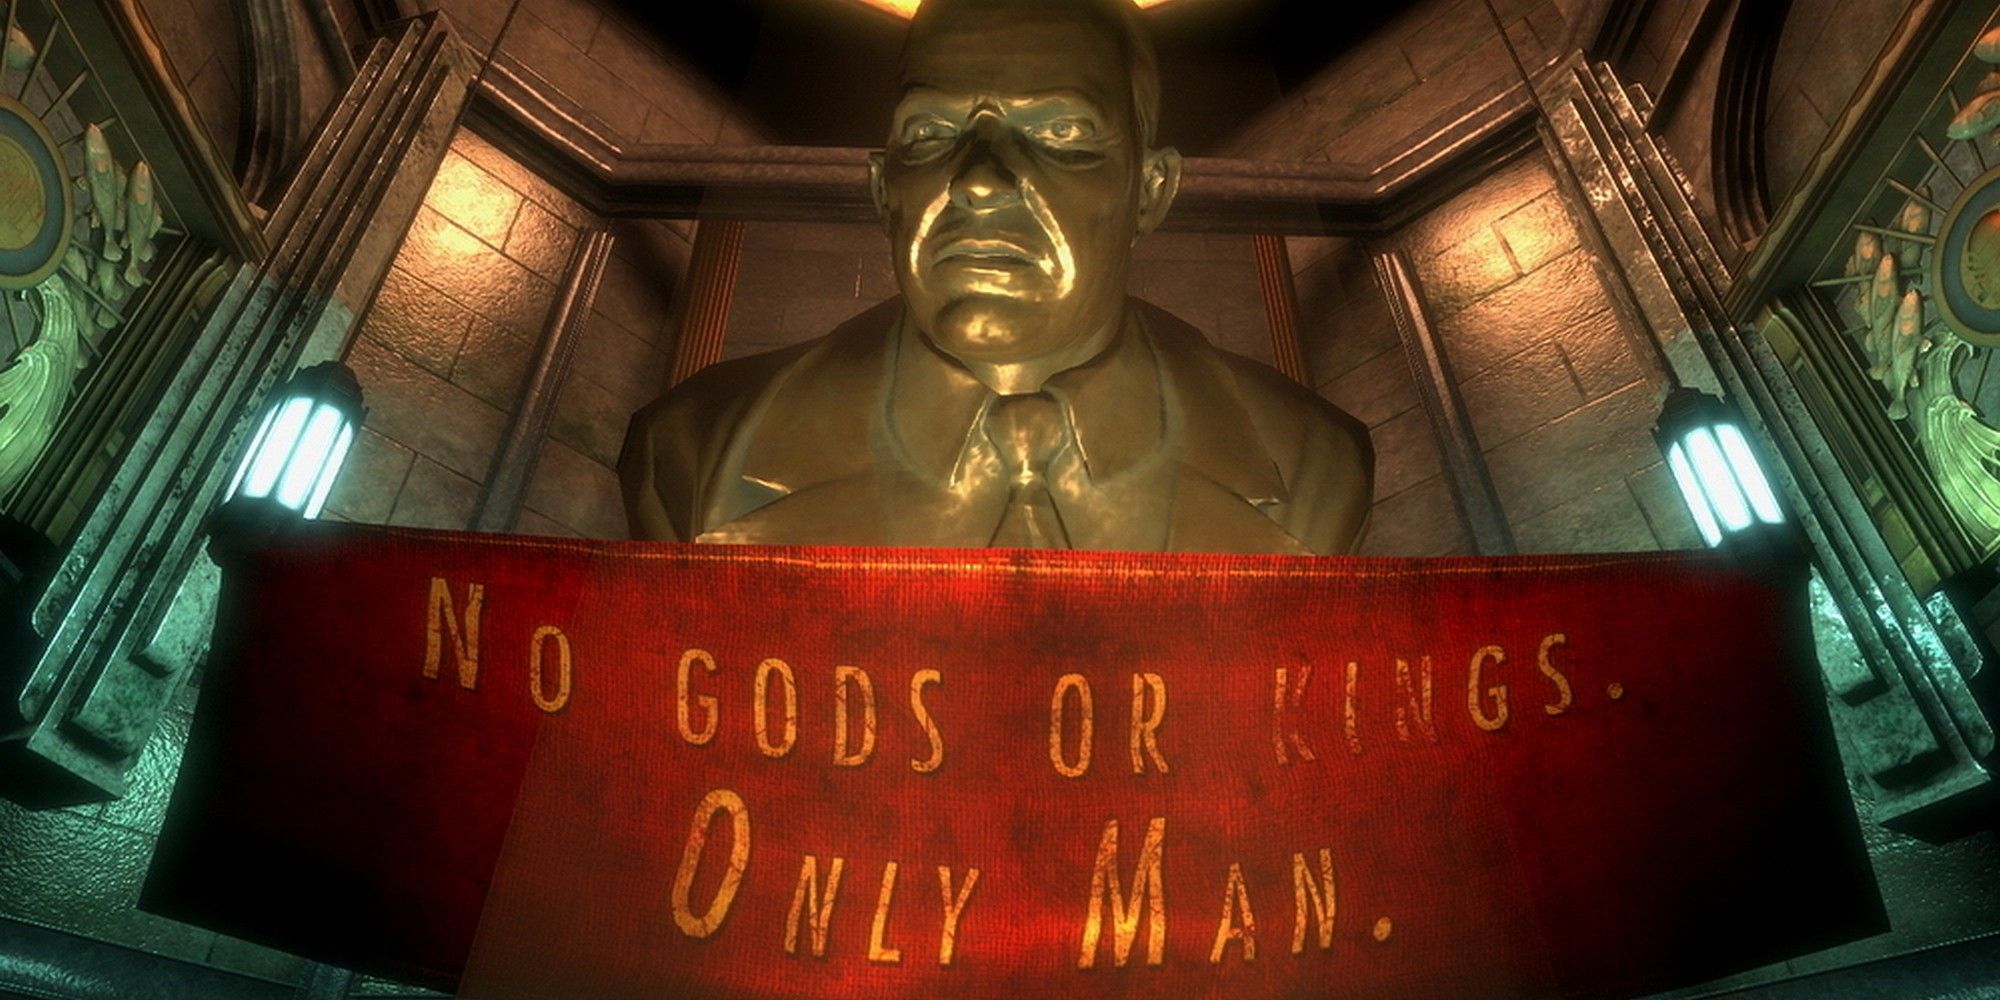 bioshock intro no gods or kings only man andrew ryan banner